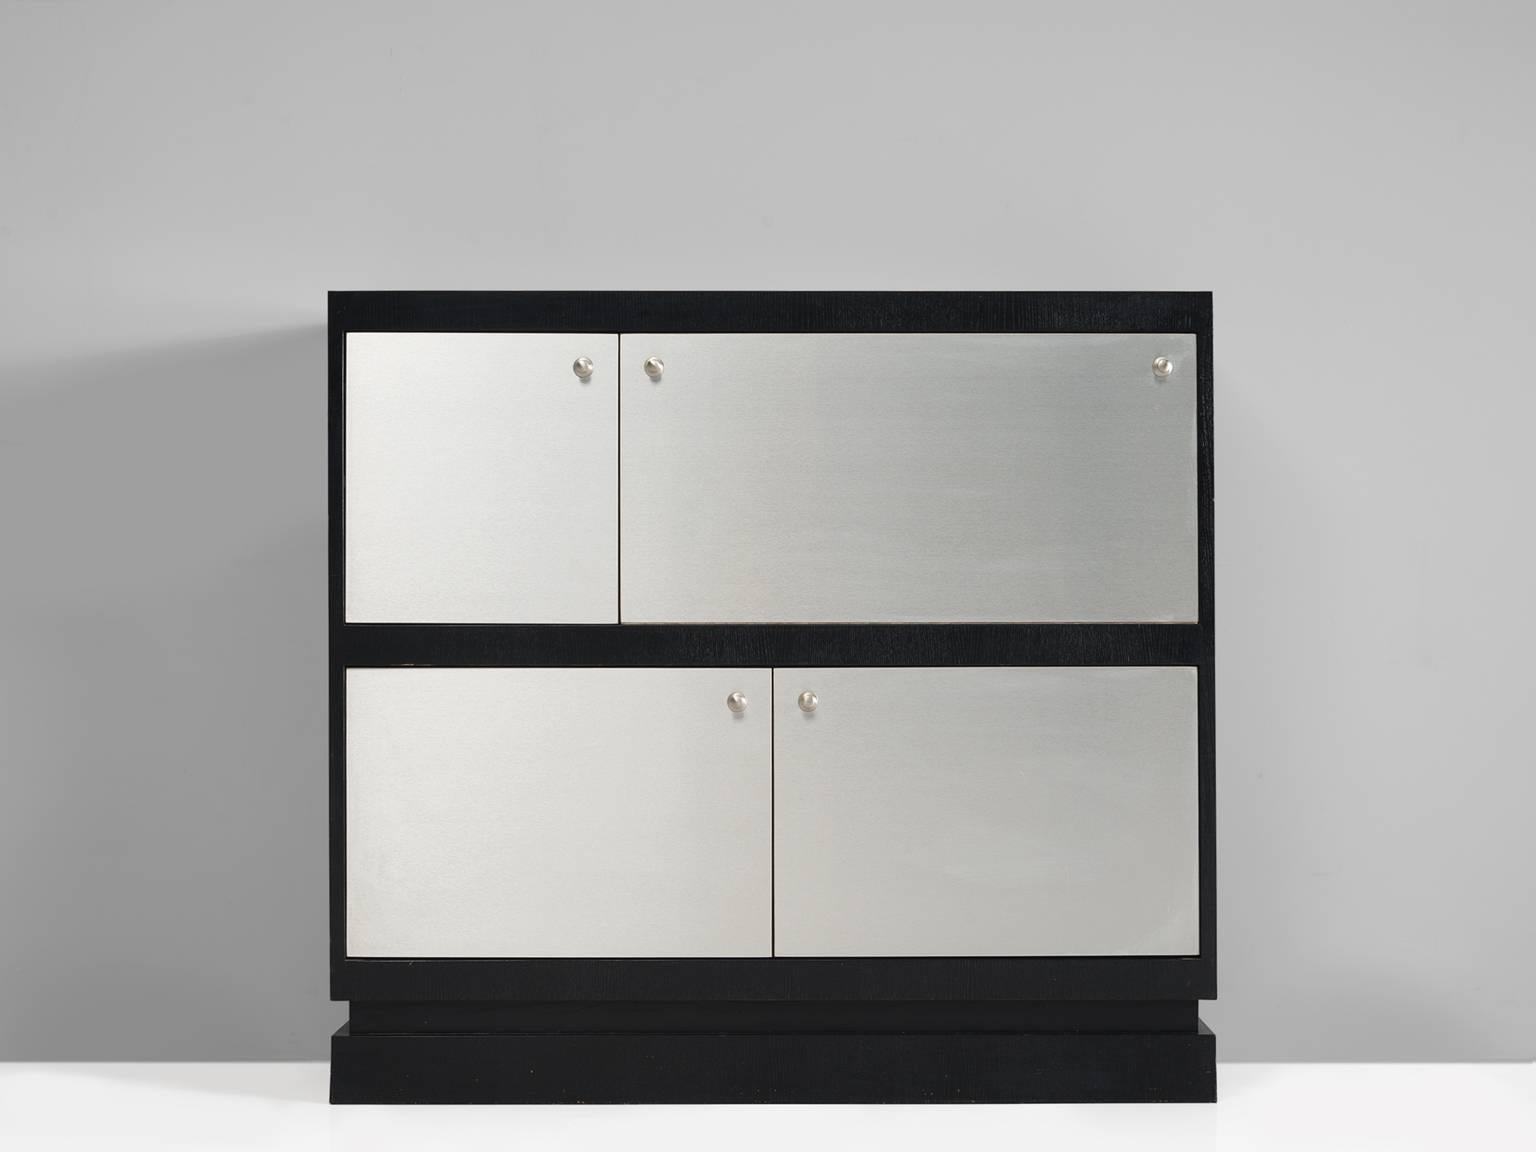 Cabinet, plywood, aluminum, Belgium, ca. 1970.

This high cabinet features four asymmetrical doors. Three of them are normal doors and one folds downwards and can be used as a liquor hatch. The frame and body of the cabinet is executed in a black